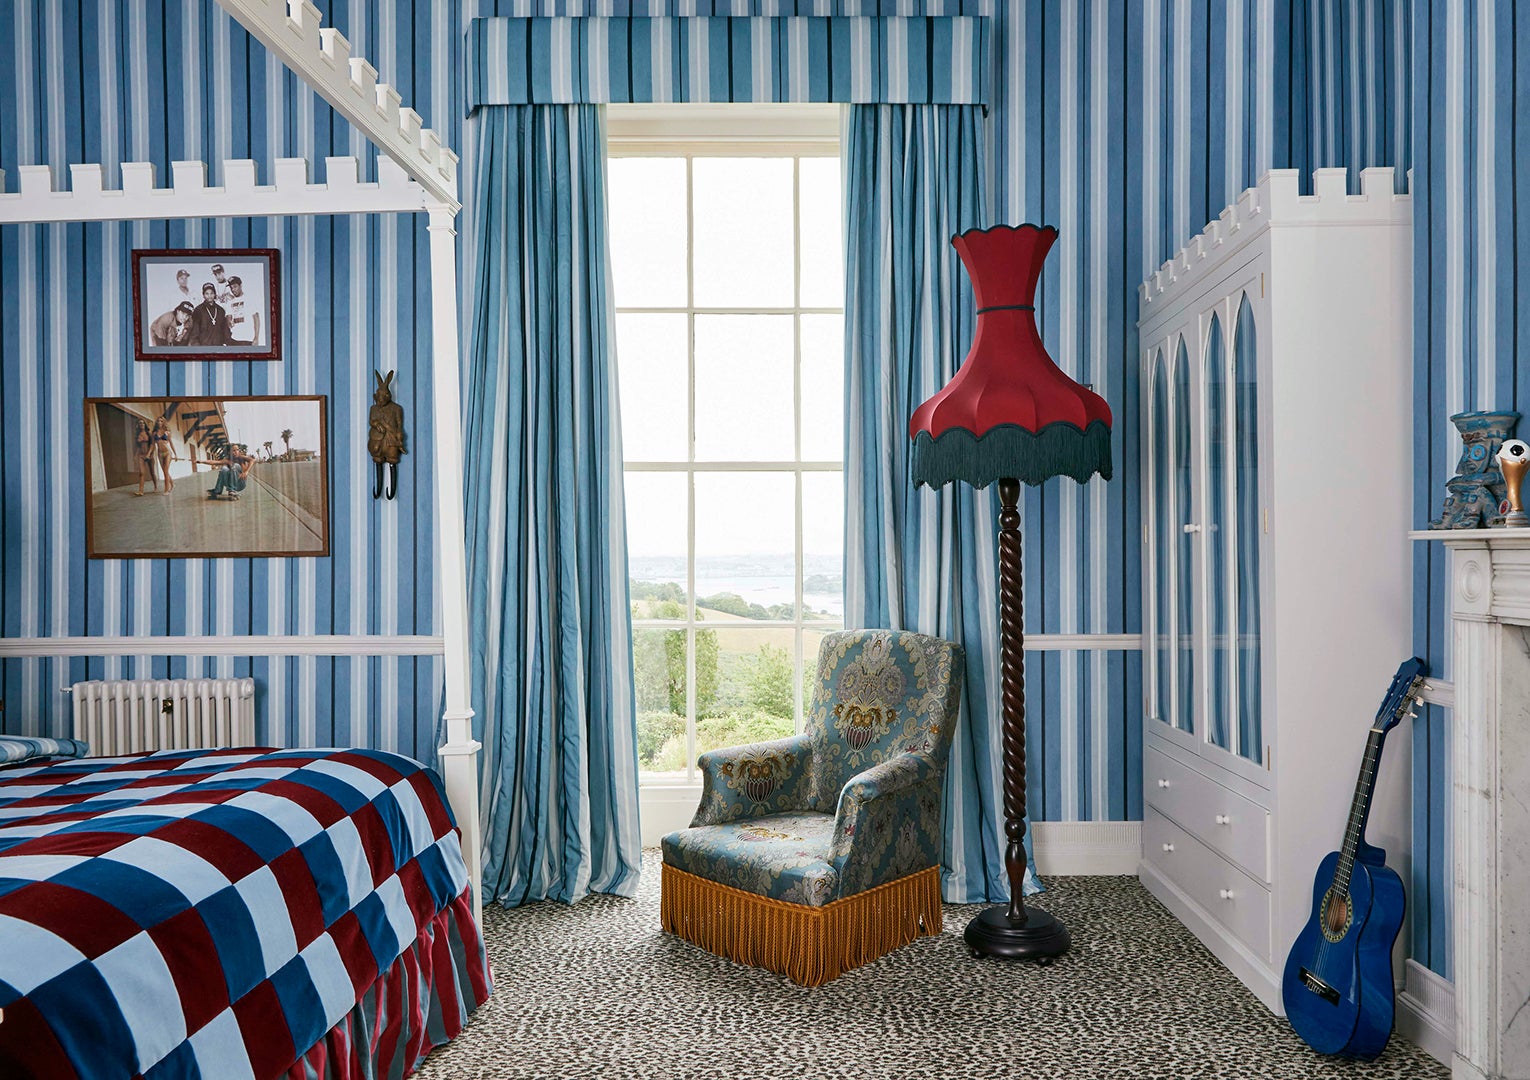 The Castle Next Door Inspired This British Teen’s Stripes-on-Stripes Bedroom